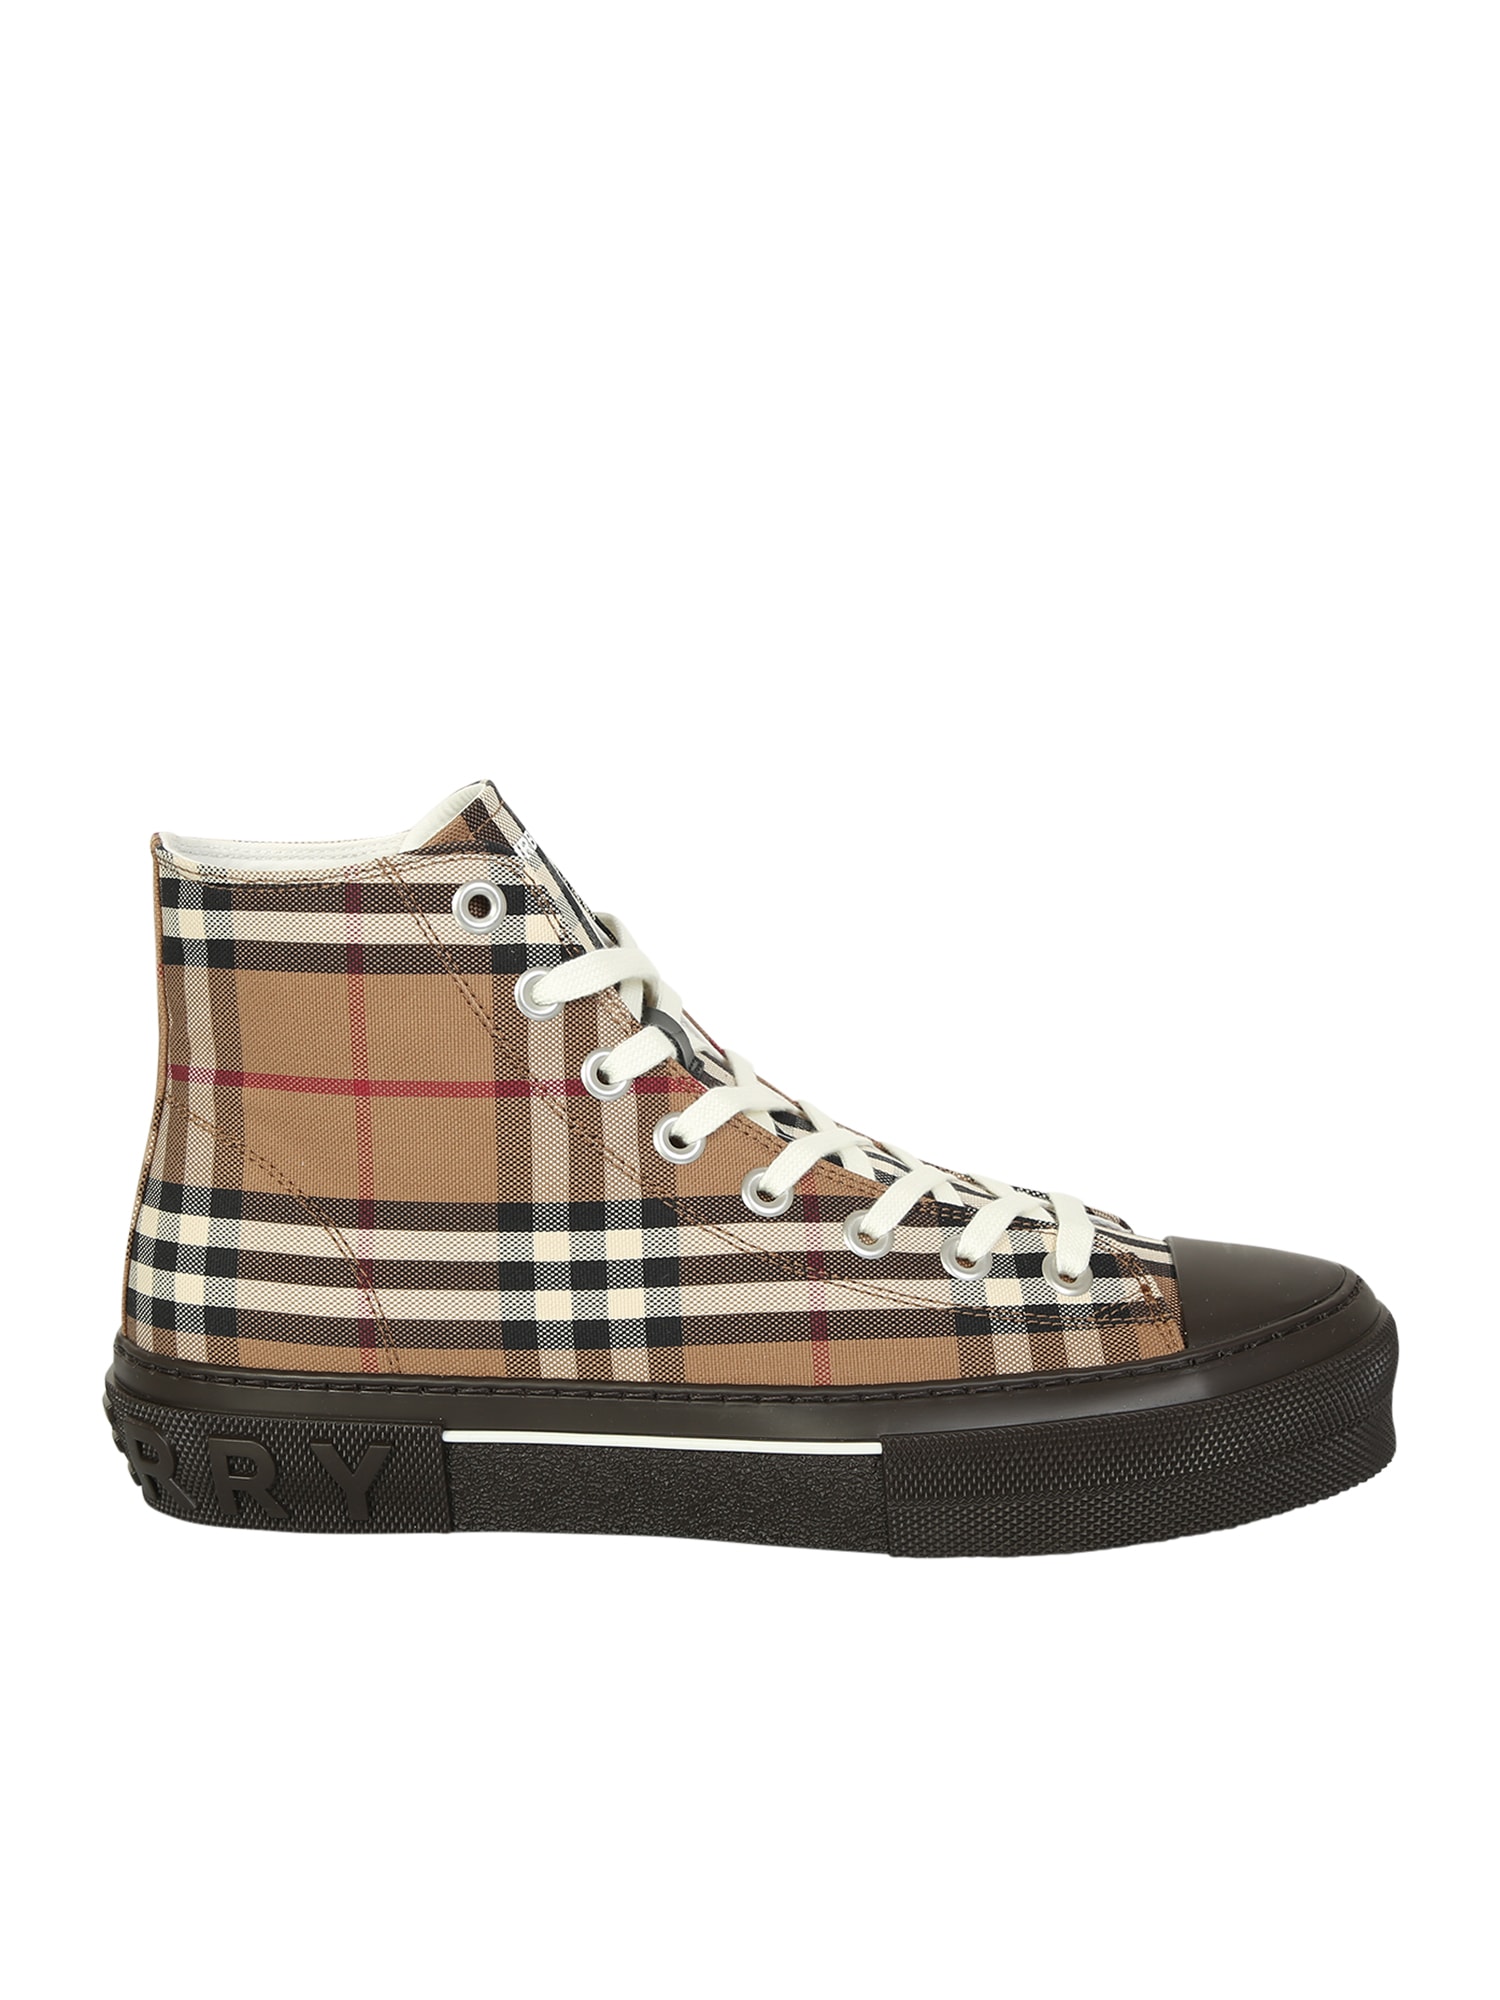 Sneakers With The Iconic Vintage Check Motif By Burberry, Which Characterizes The Entire New Collection. These Shoes Make The Look Authentic And Timel